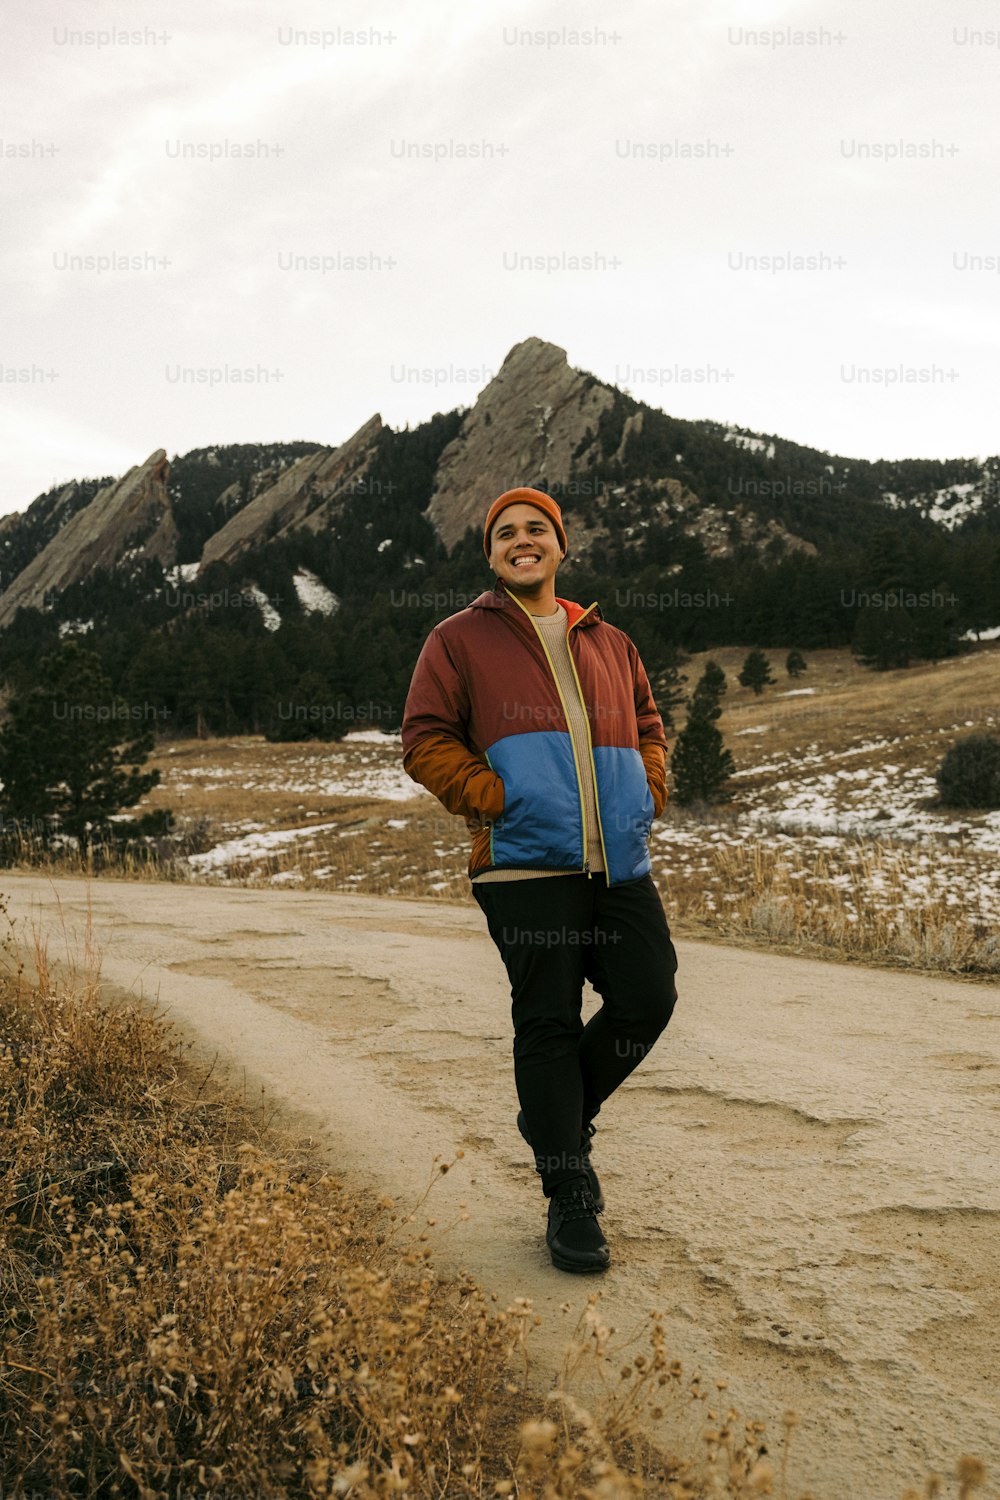 a man standing on a dirt road in front of a mountain